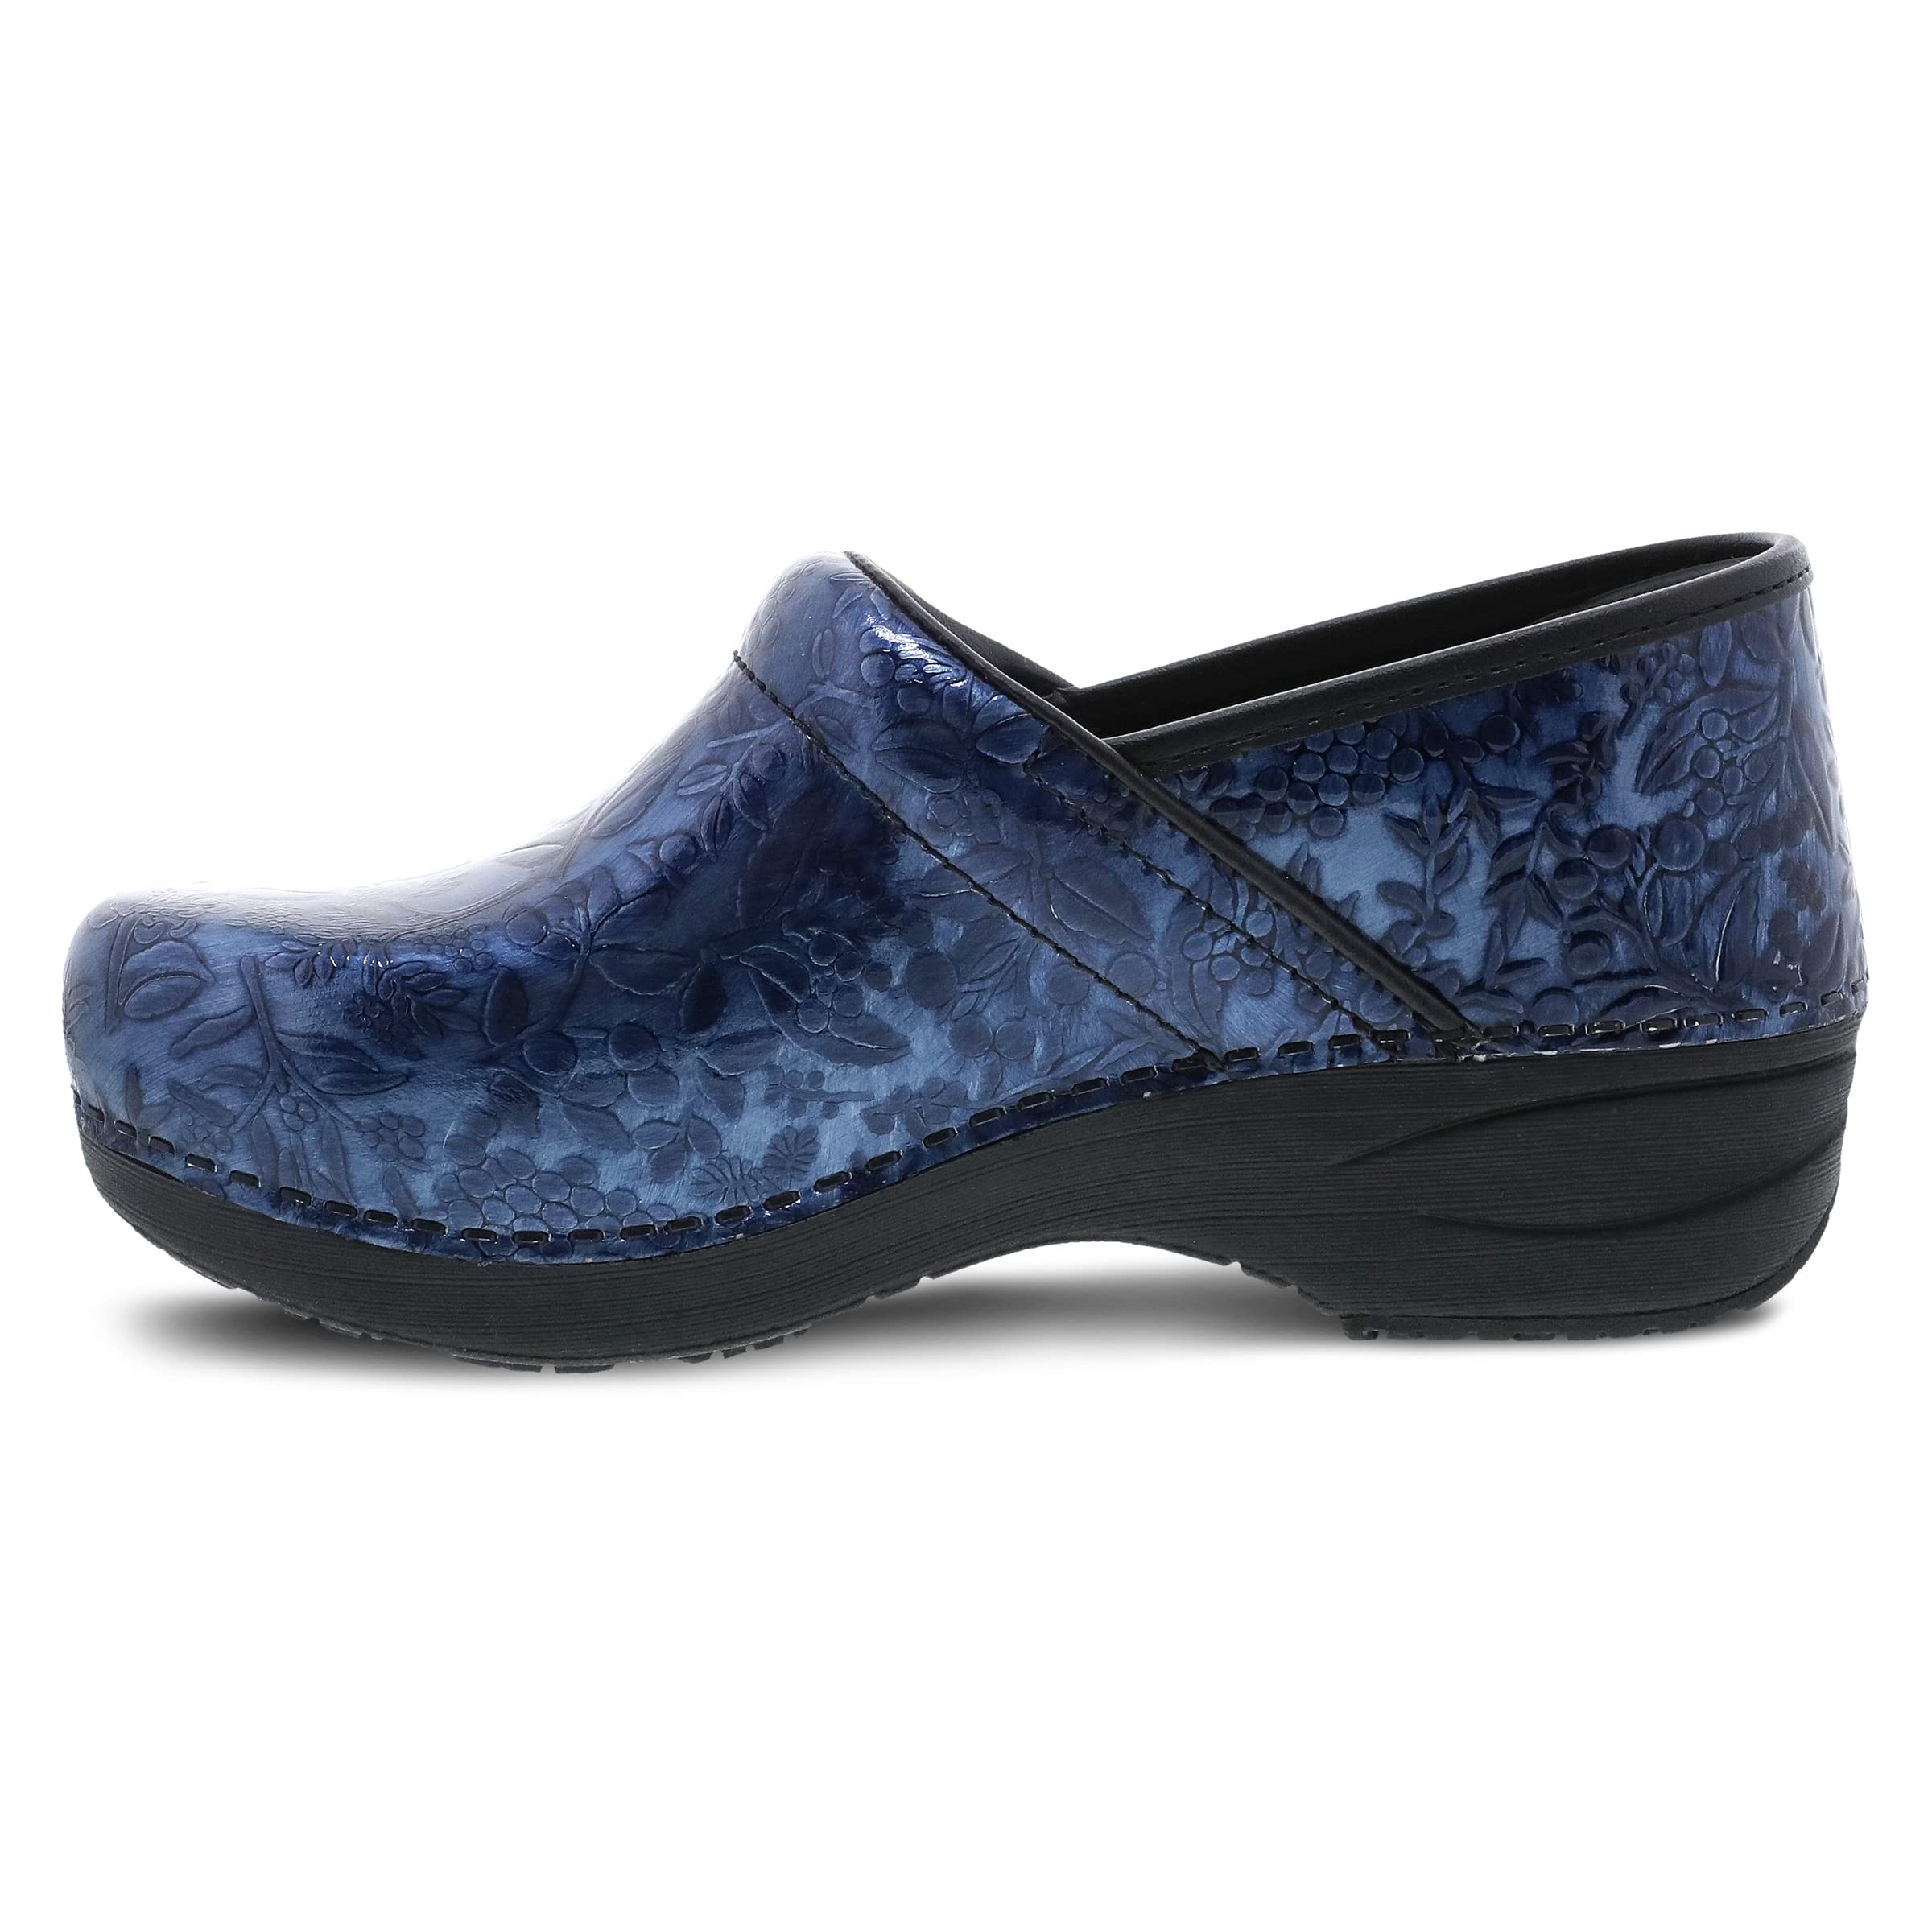 Dansko XP 2.0 Clogs for Women - Lightweight Slip Resistant Footwear for Comfort and Support - Ideal for Long Standing Professionals - Nursing, Veterinarians, Food Service, Healthcare Professionals